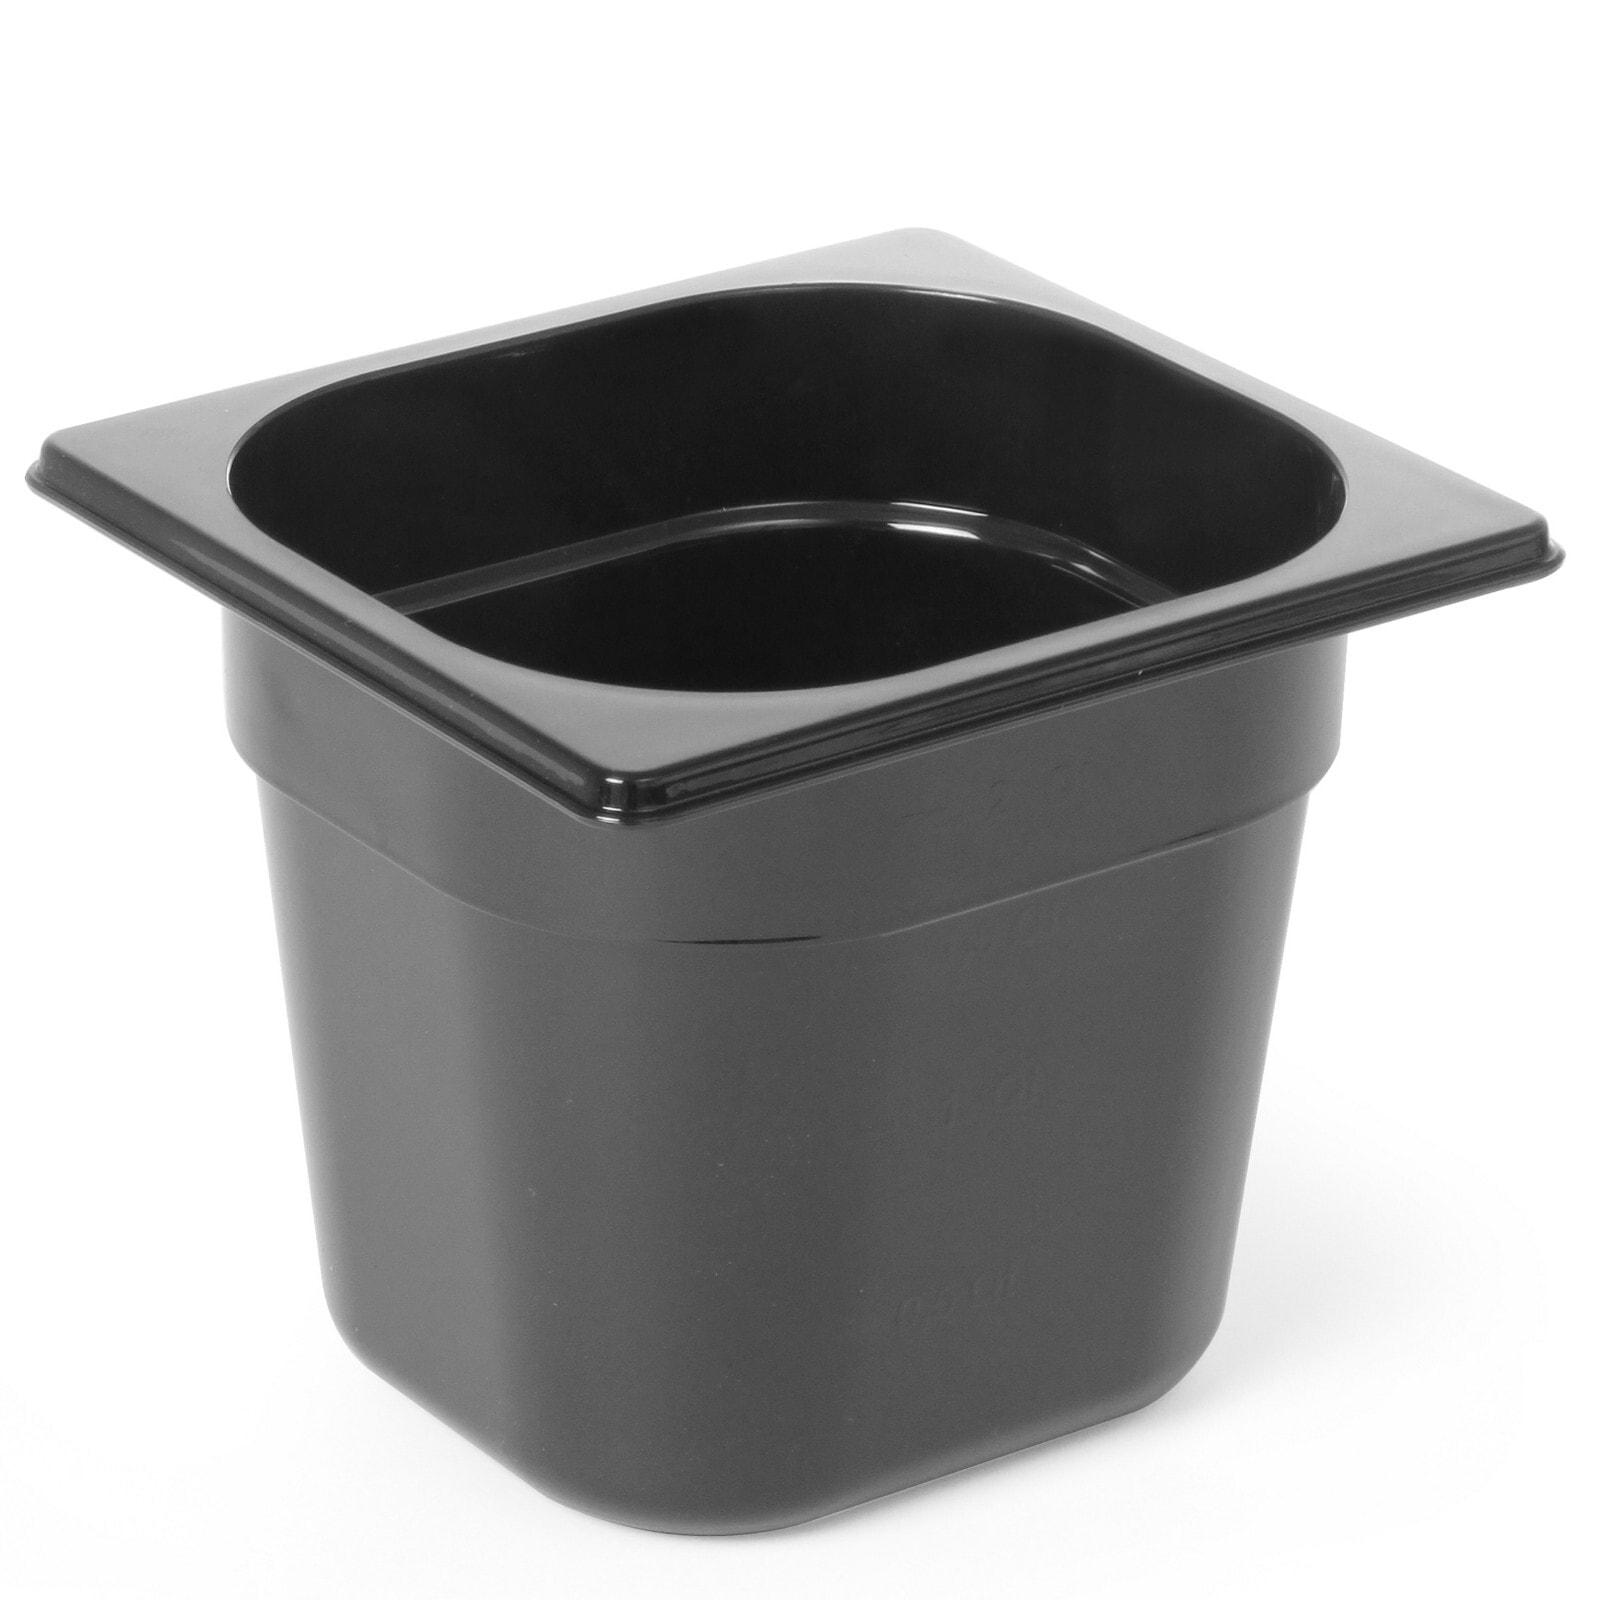 Black polycarbonate container GN 1/6, height 100 mm - Hendi 862728